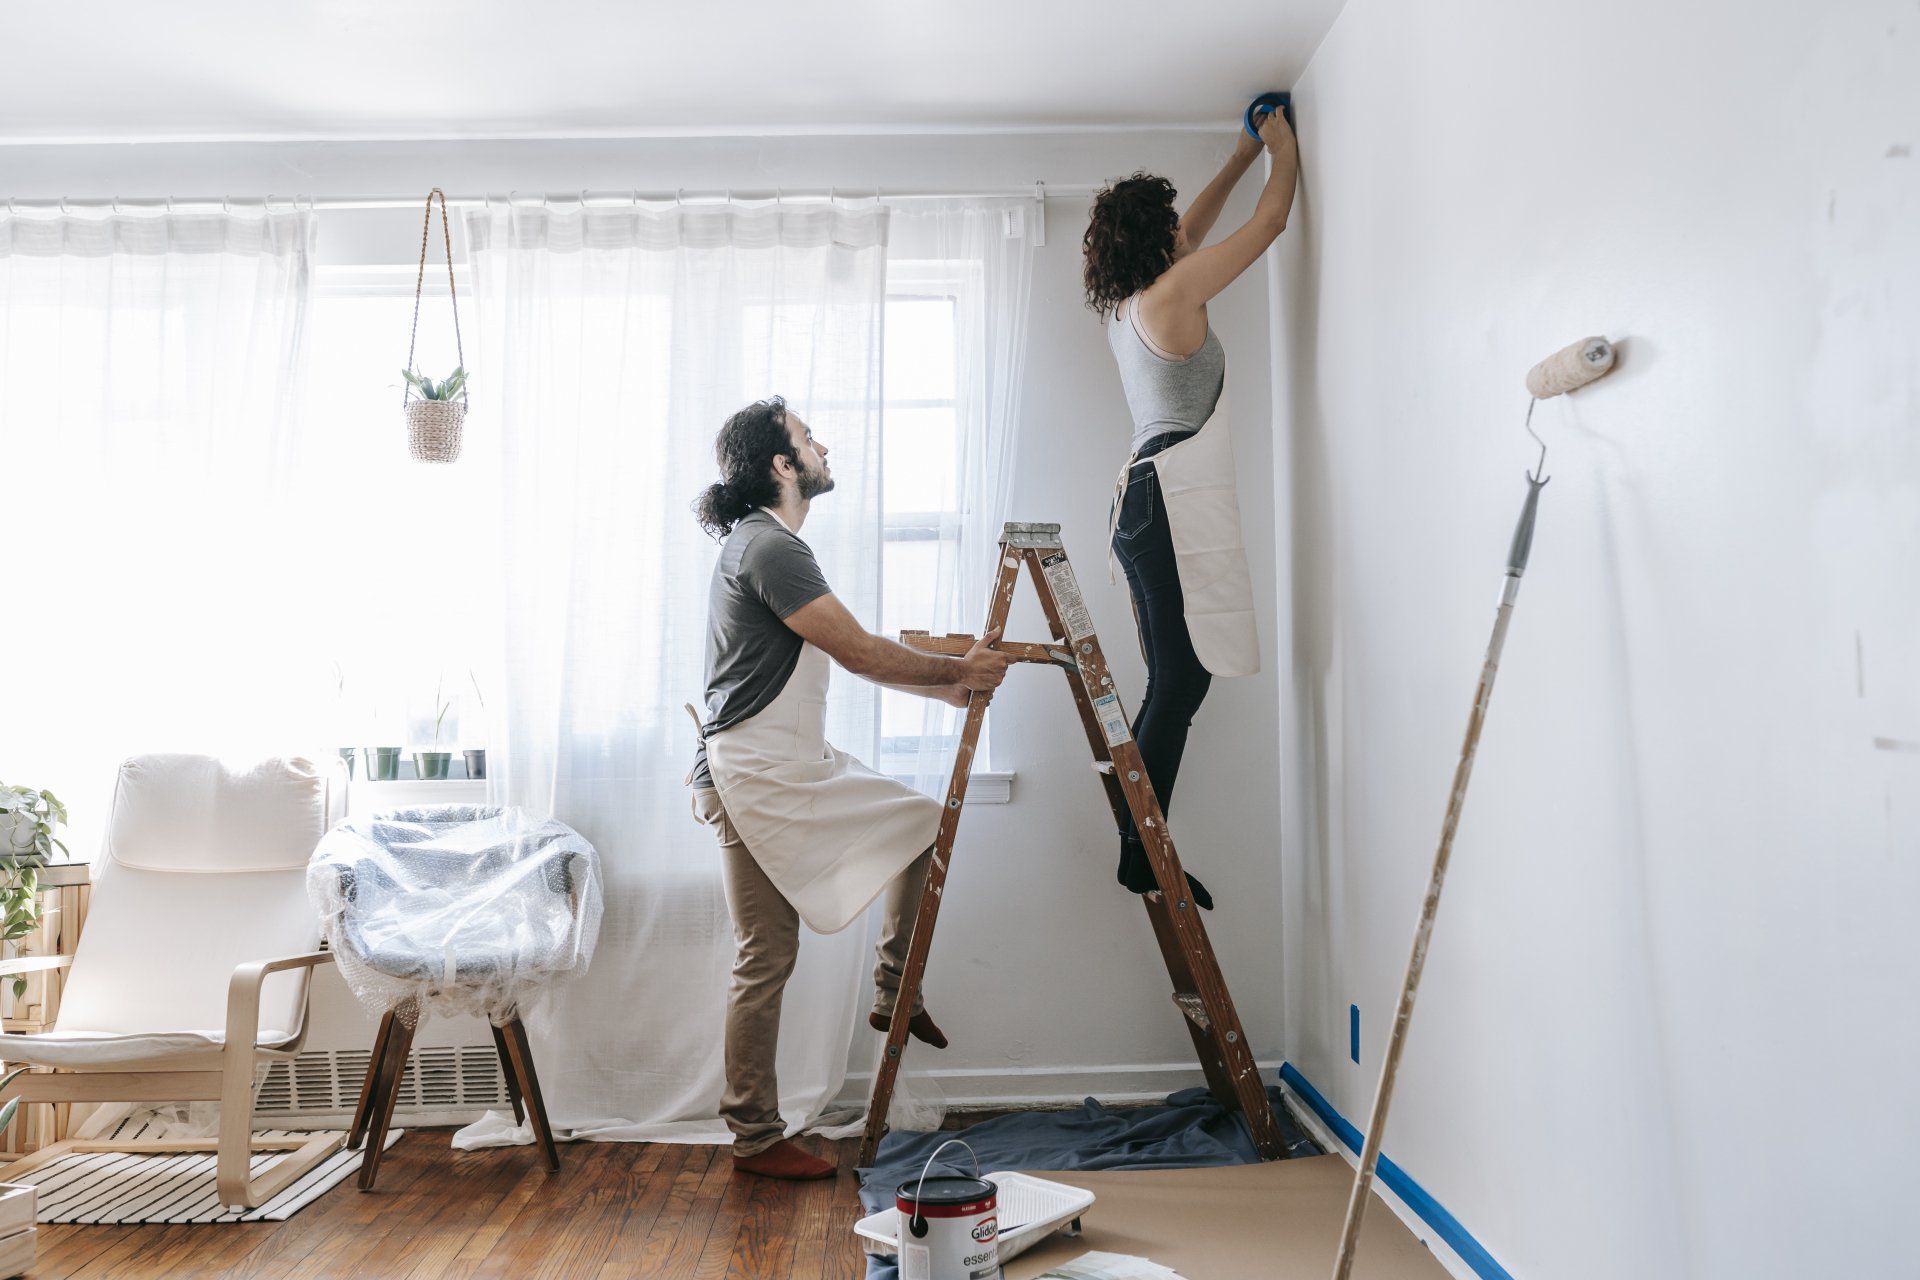 Two people painting their living room interior.